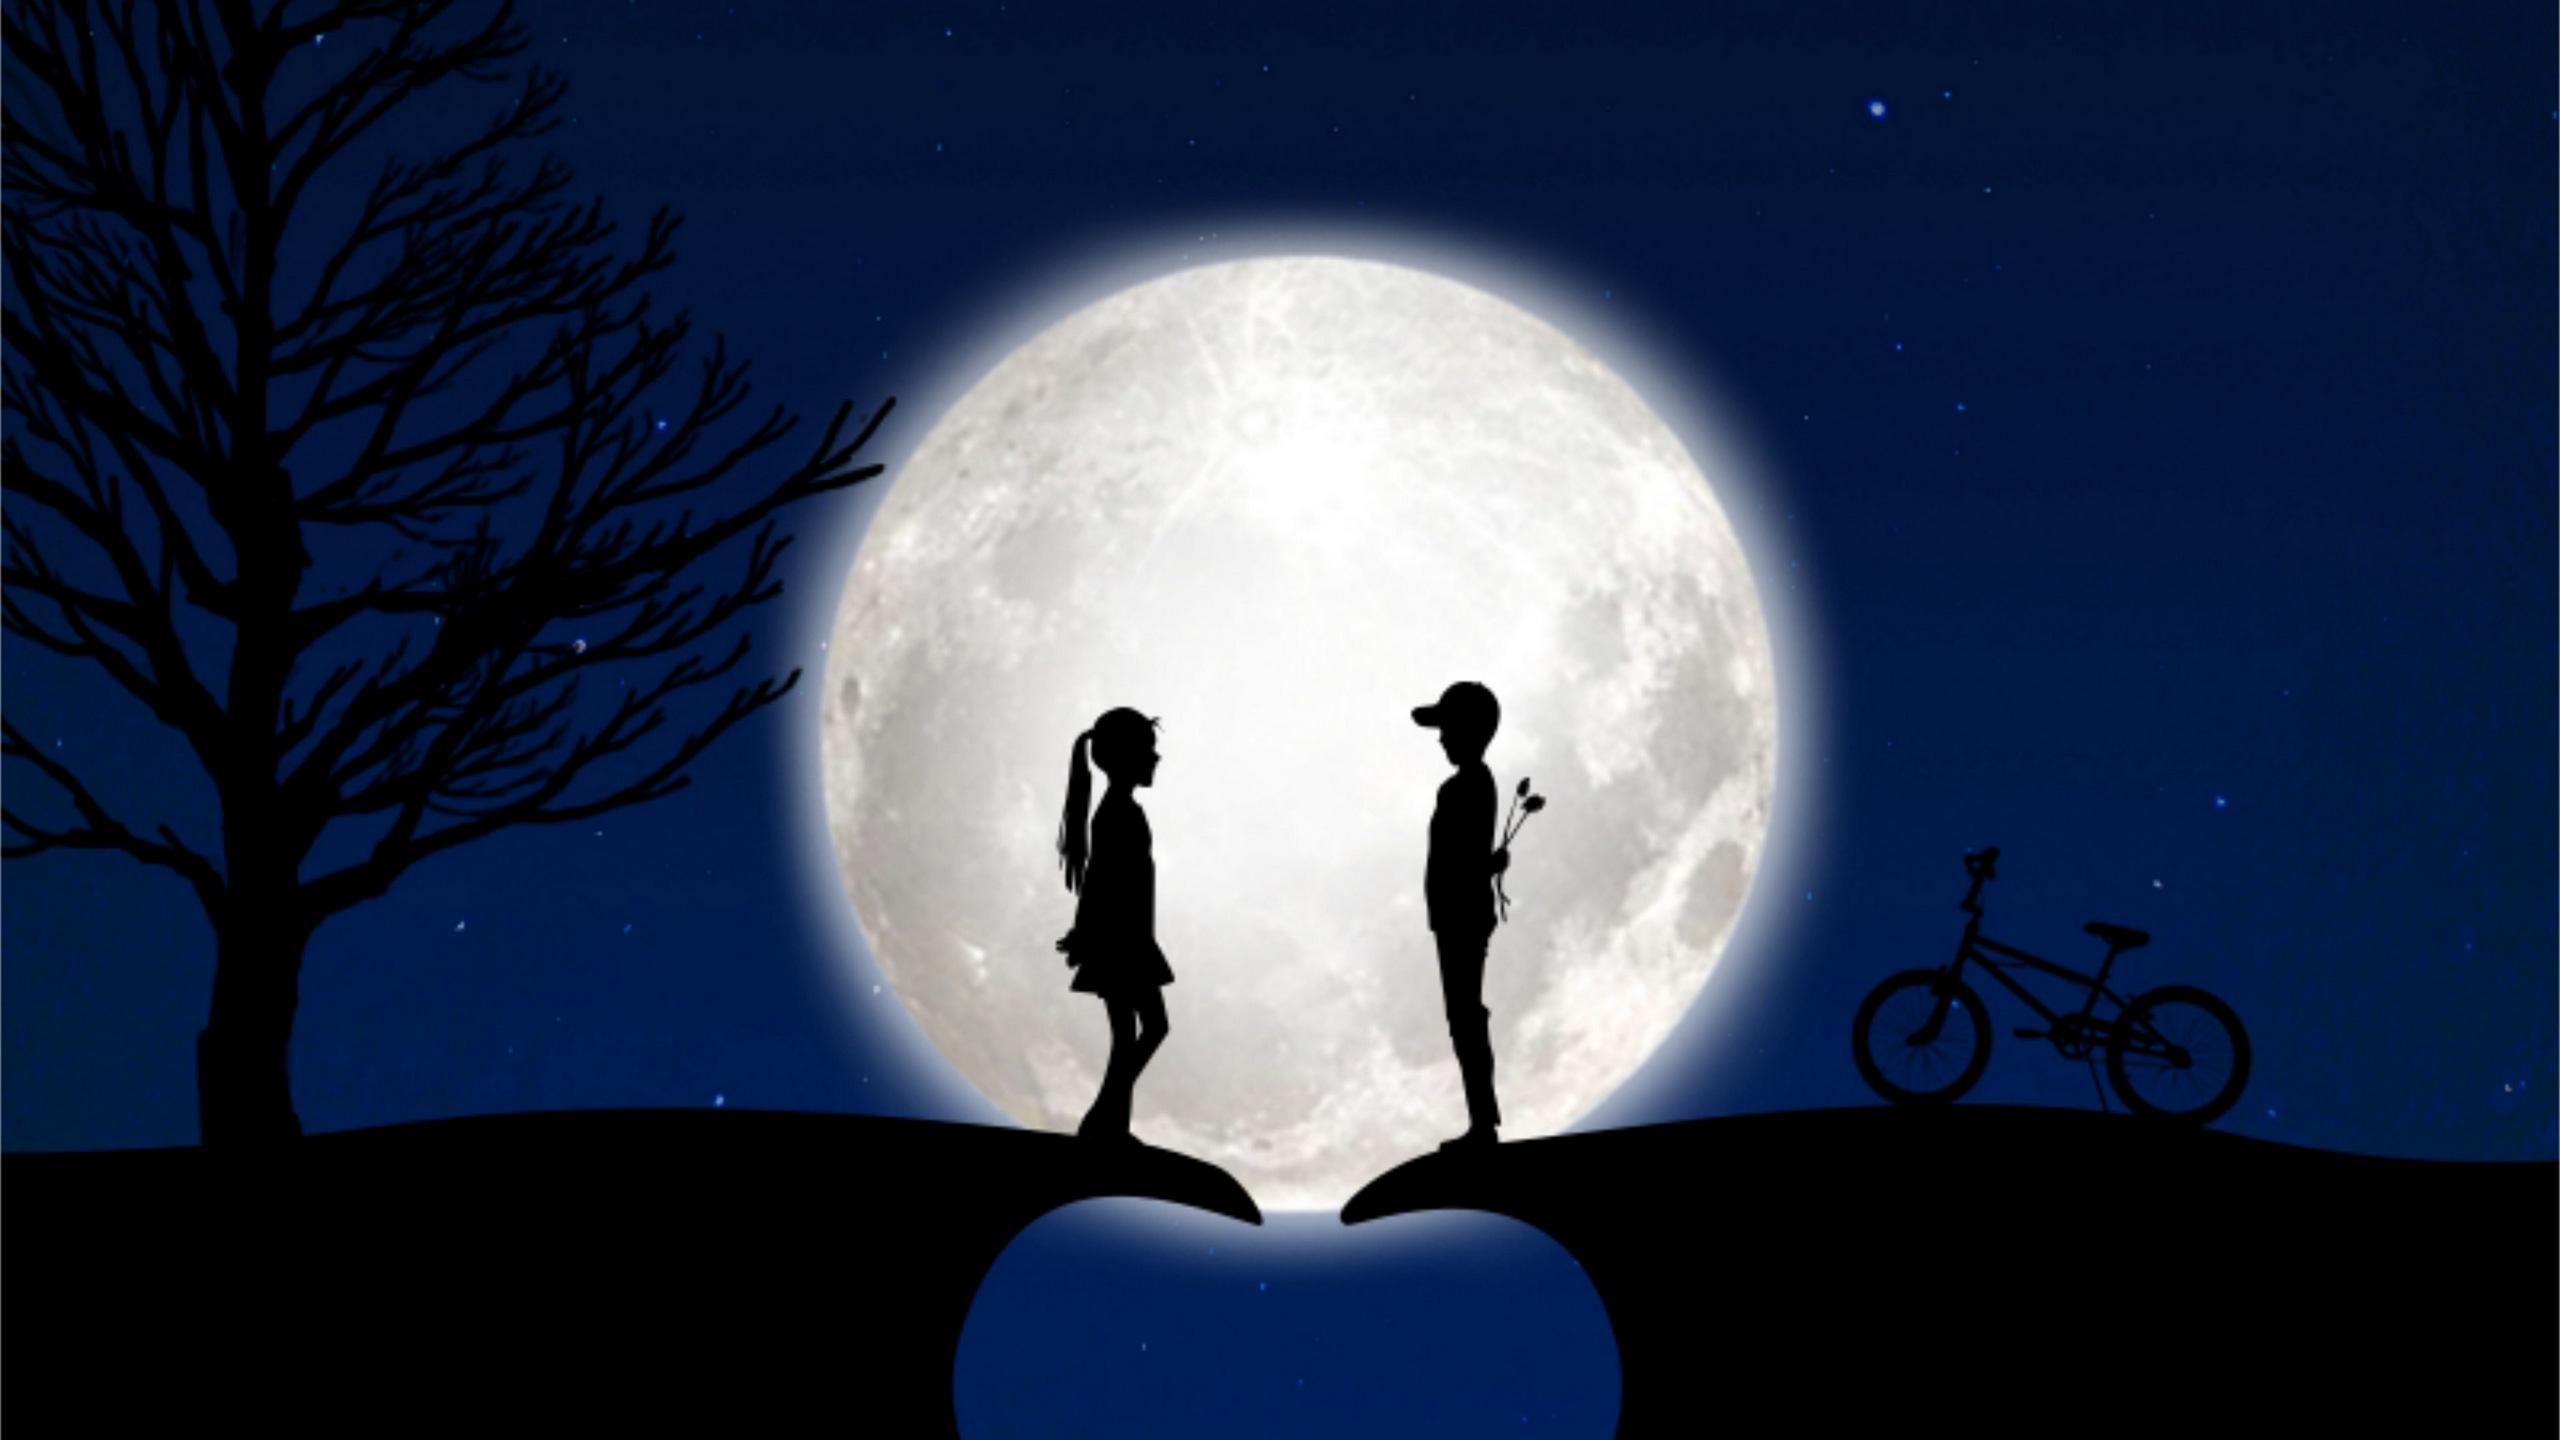 talking to the moon wallpaper